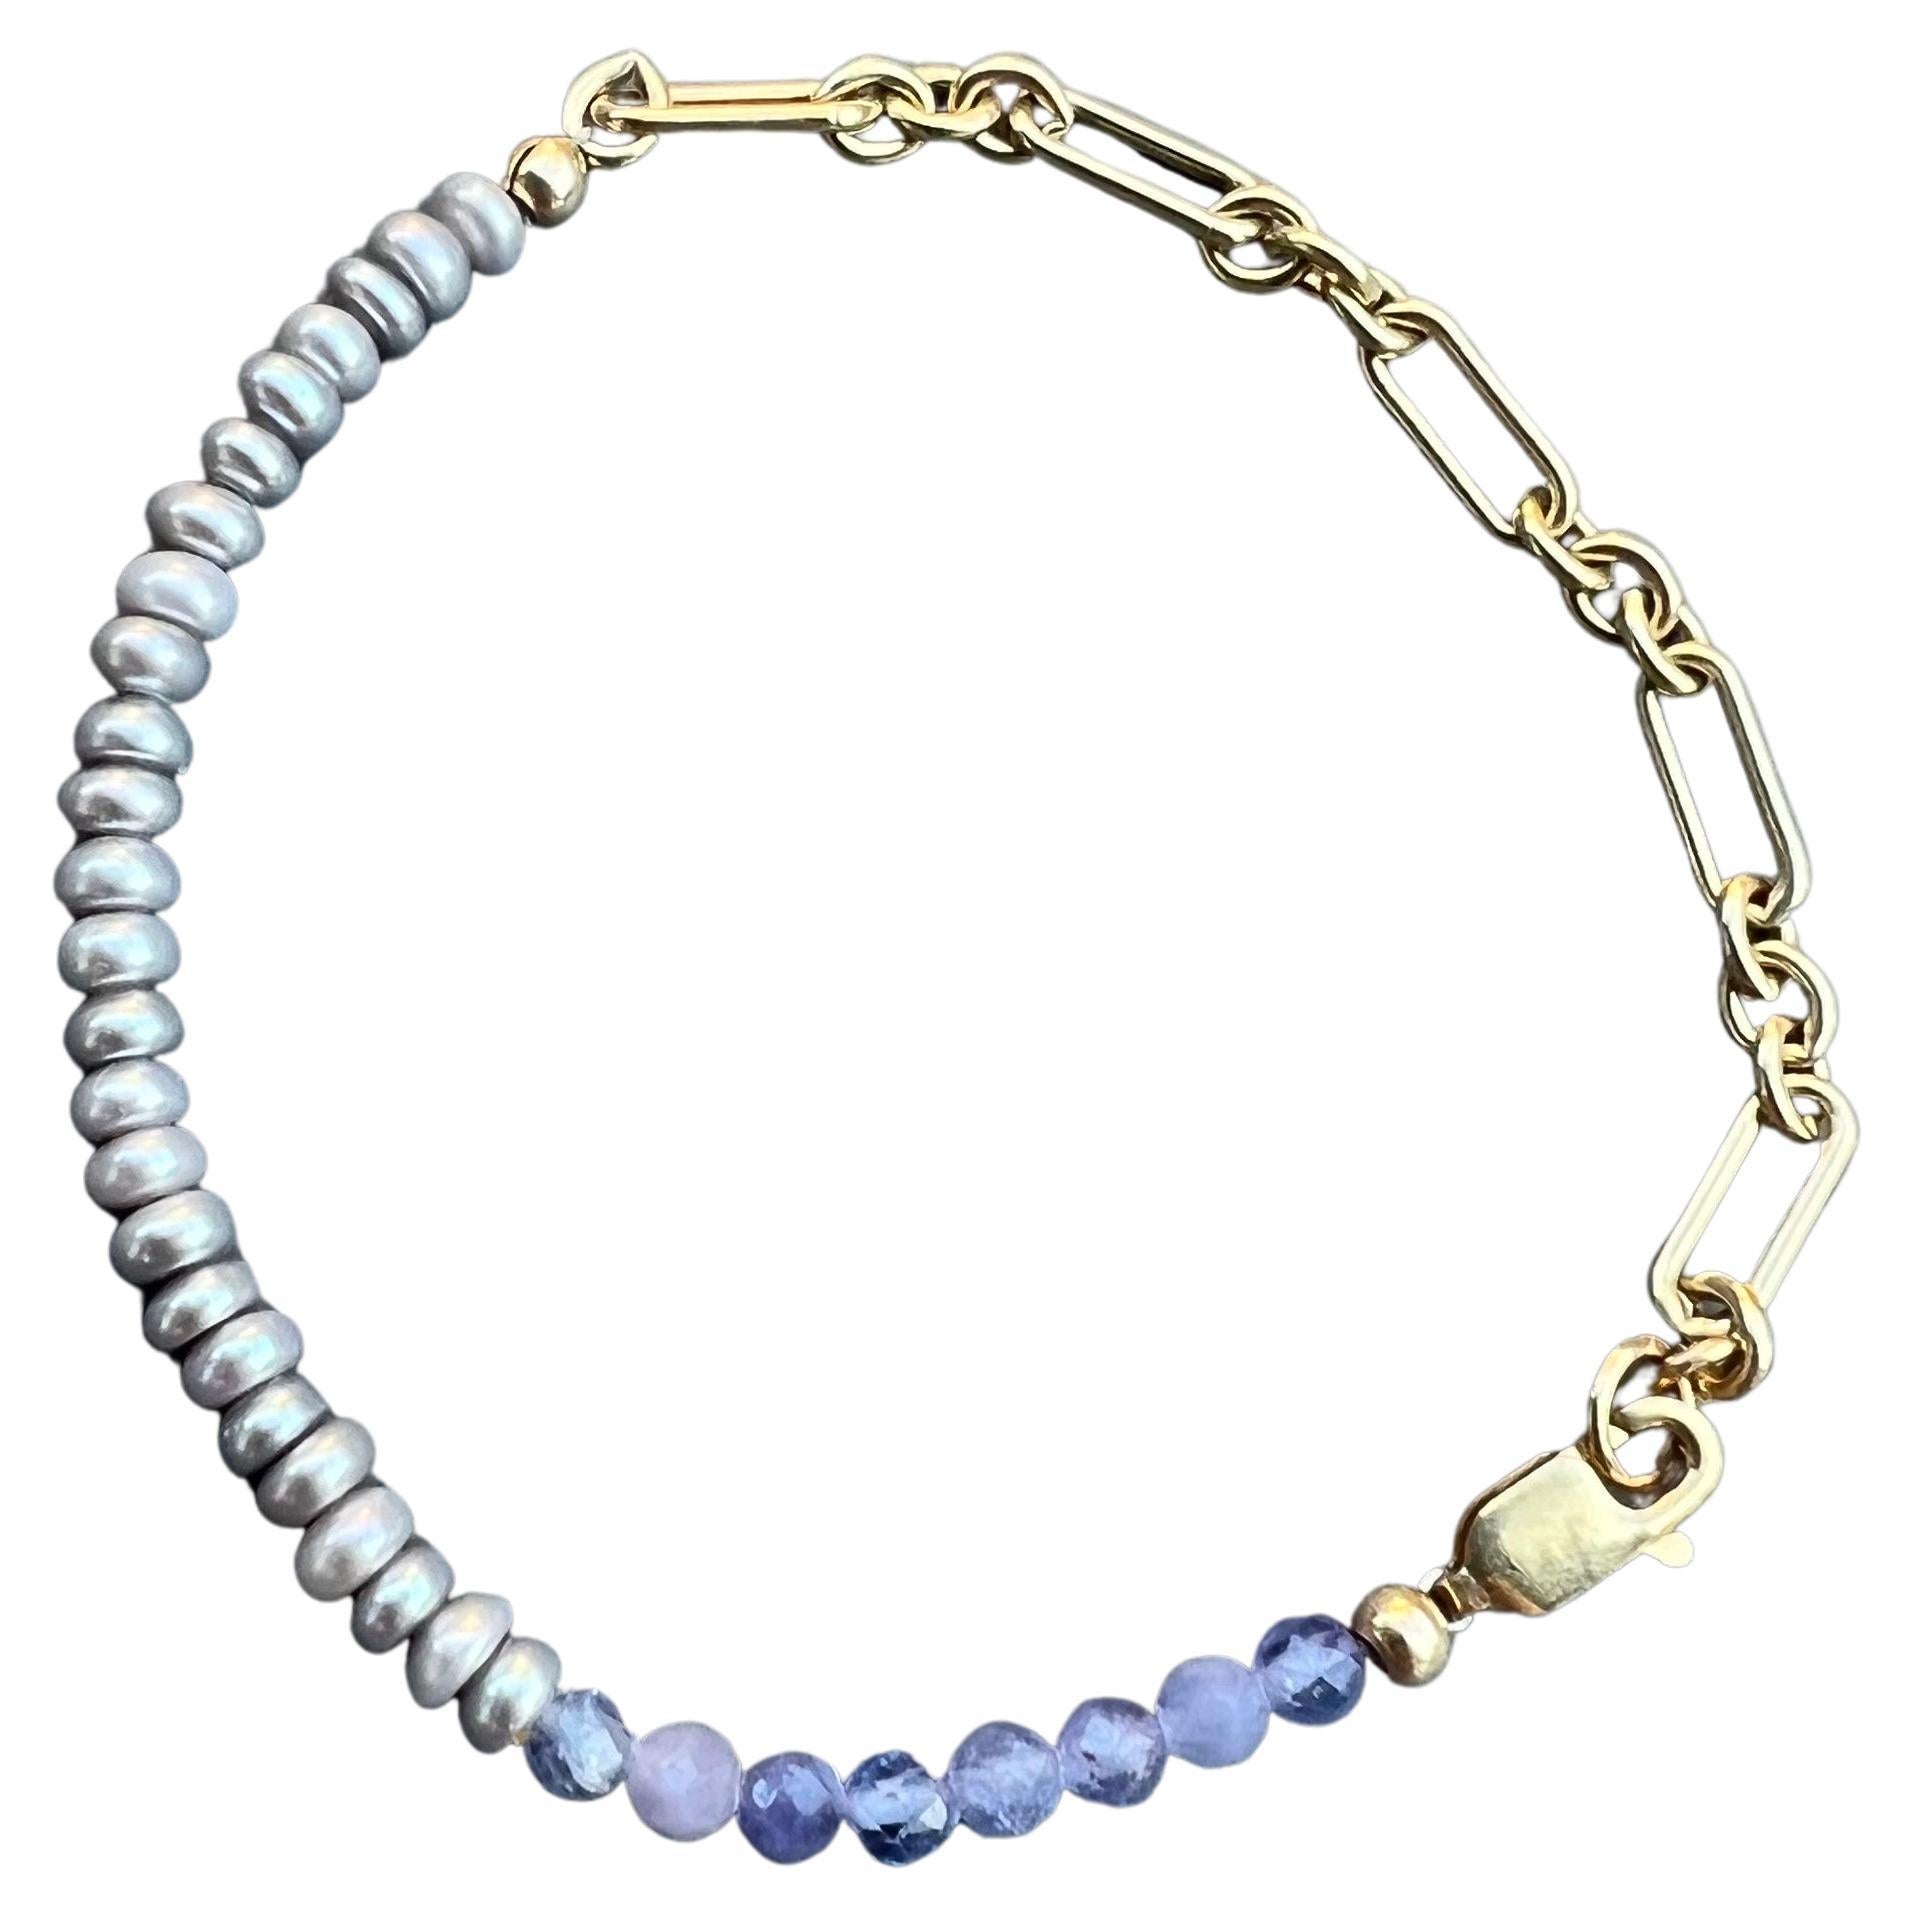 Pearl Tanzanite Ankle Bracelet Beaded Gold Filled Chain J Dauphin For Sale